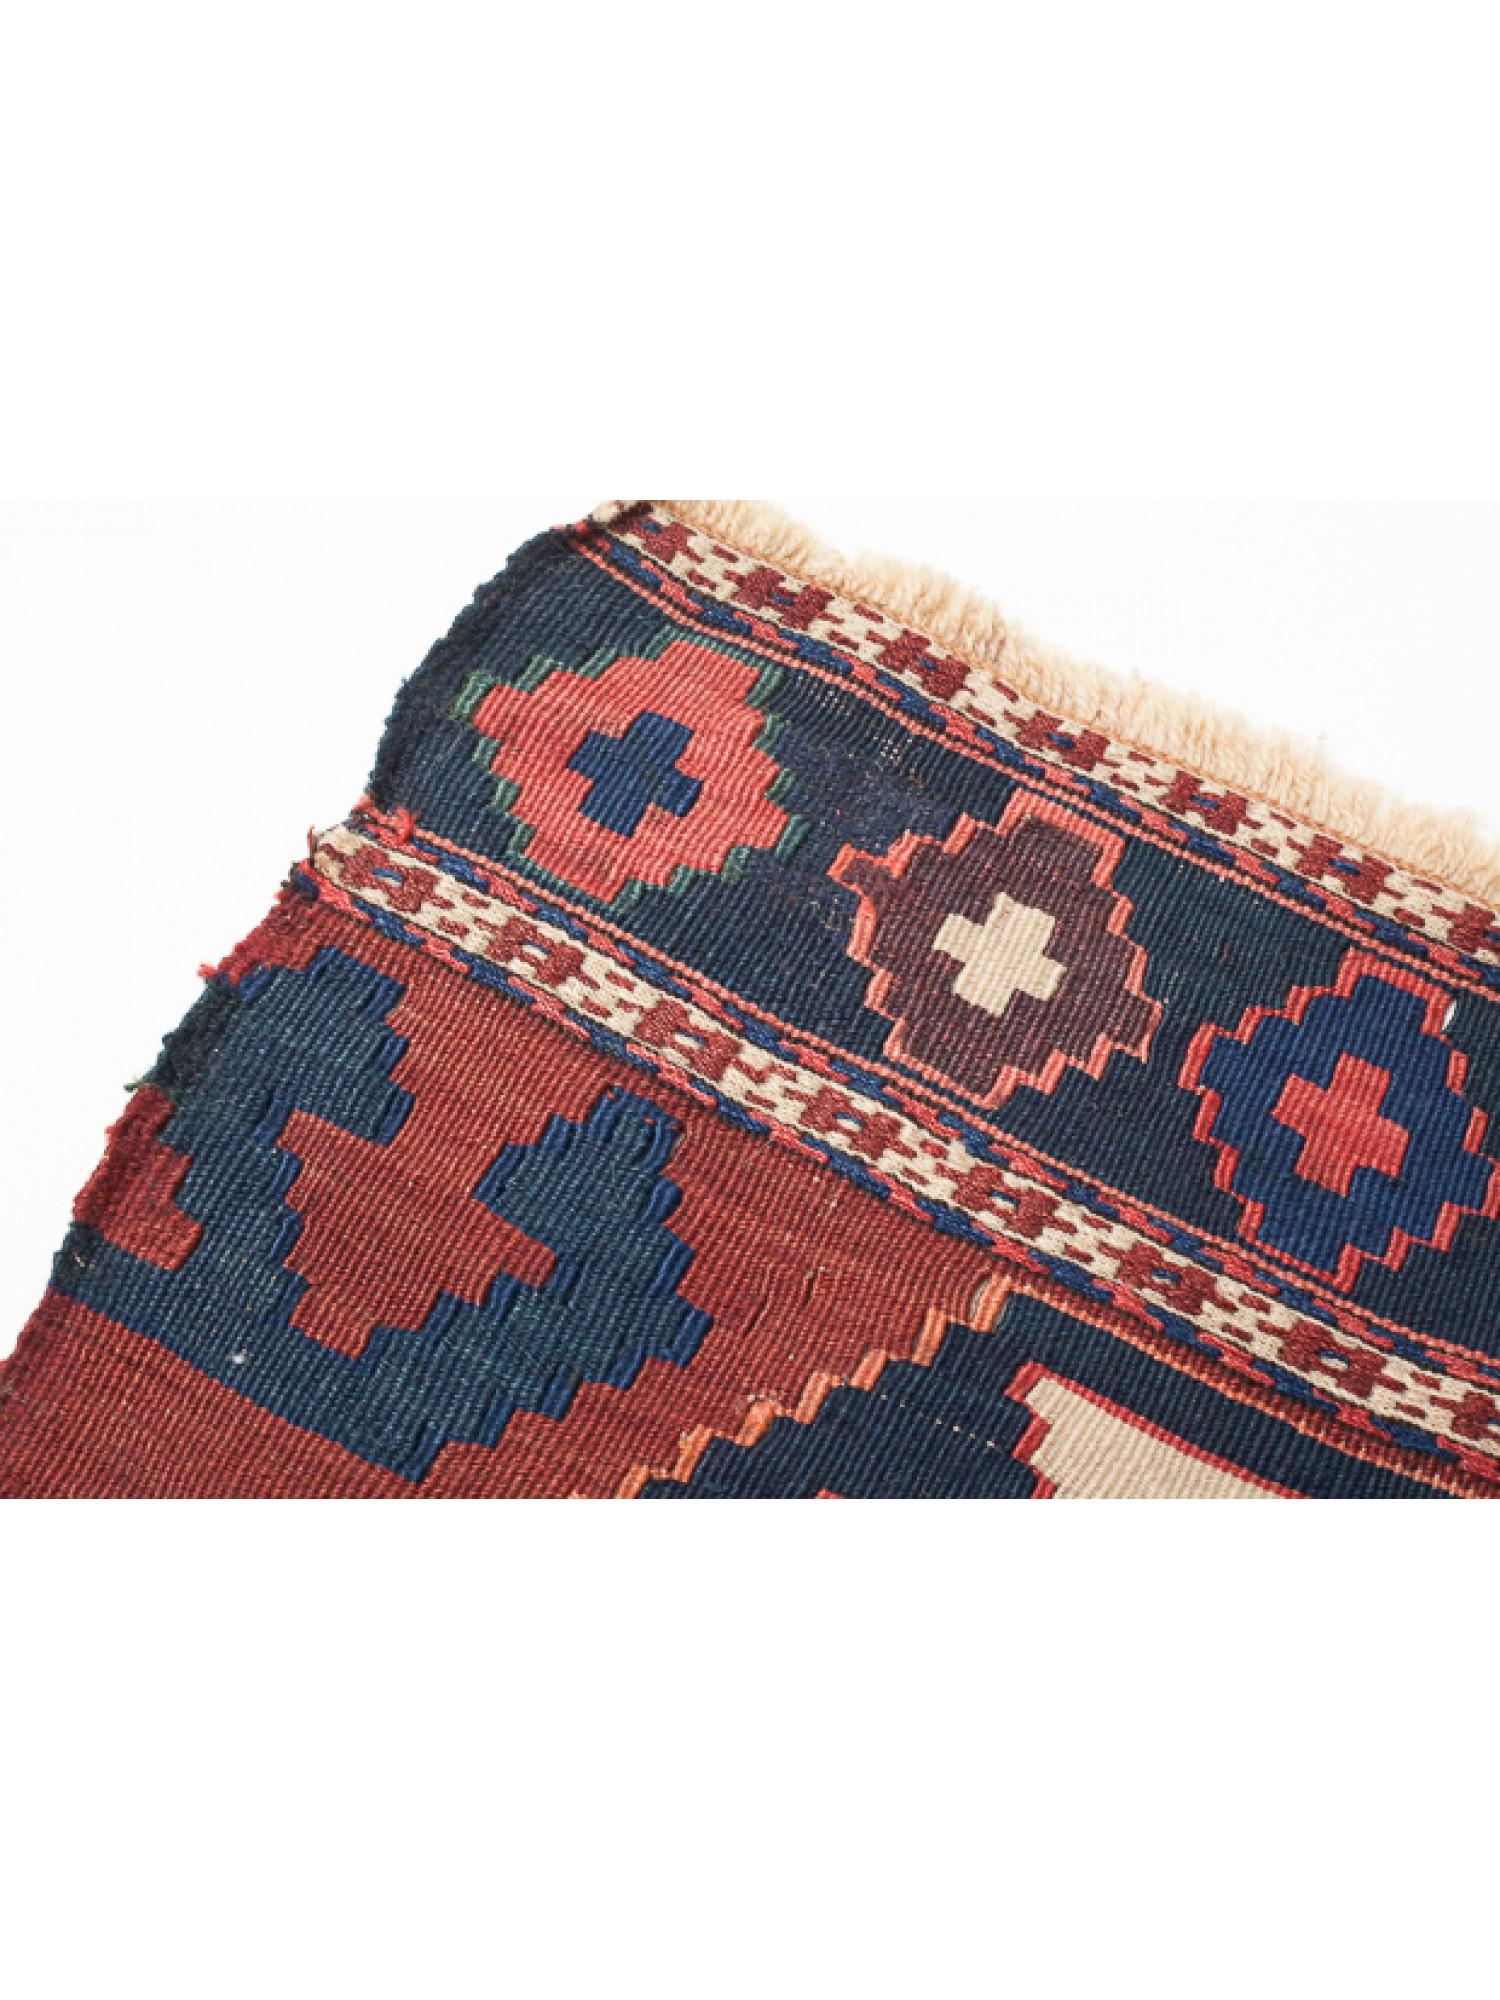 This is an antique collectible Early 20th century Kilim Woven Cradle Part from the Caucasus region with a rare and beautiful color composition.

Of the four countries that make up the Caucasus, Azerbaijan produces the most kilims, and the land has